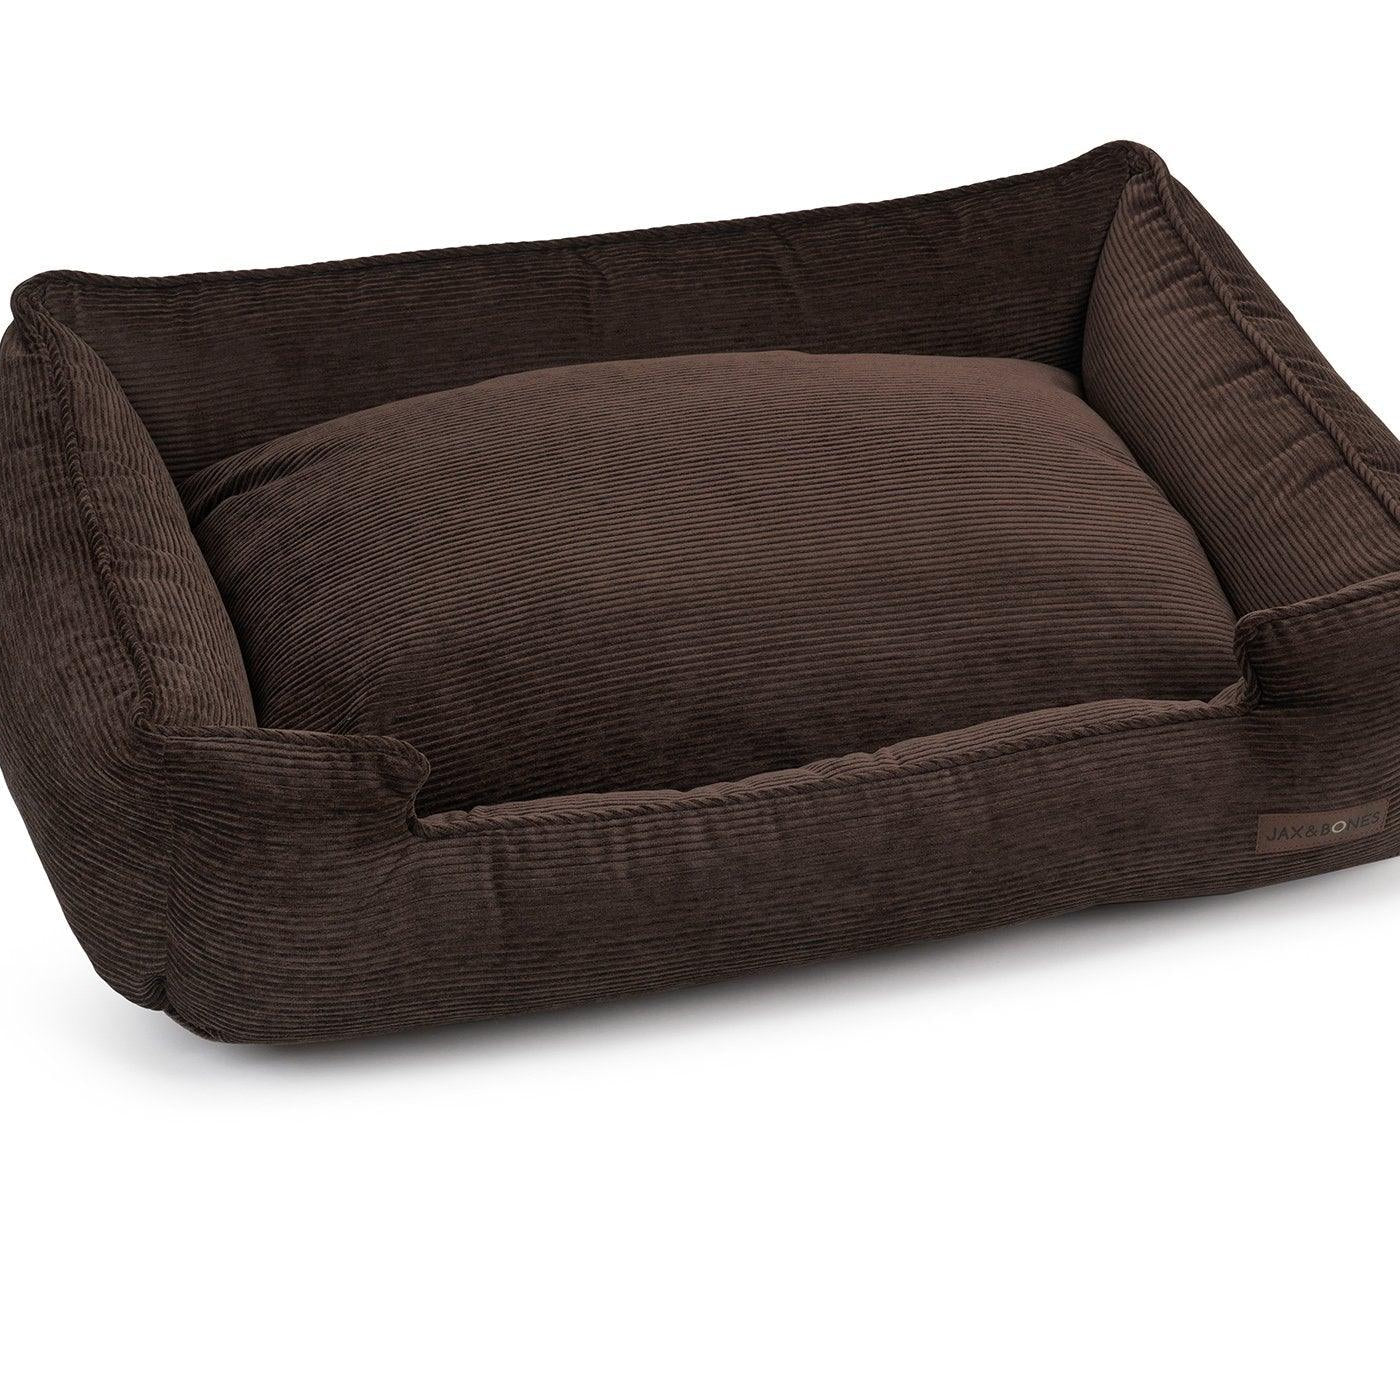 Ridges Chocolate Lounge Bed - Rocky & Maggie's Pet Boutique and Salon